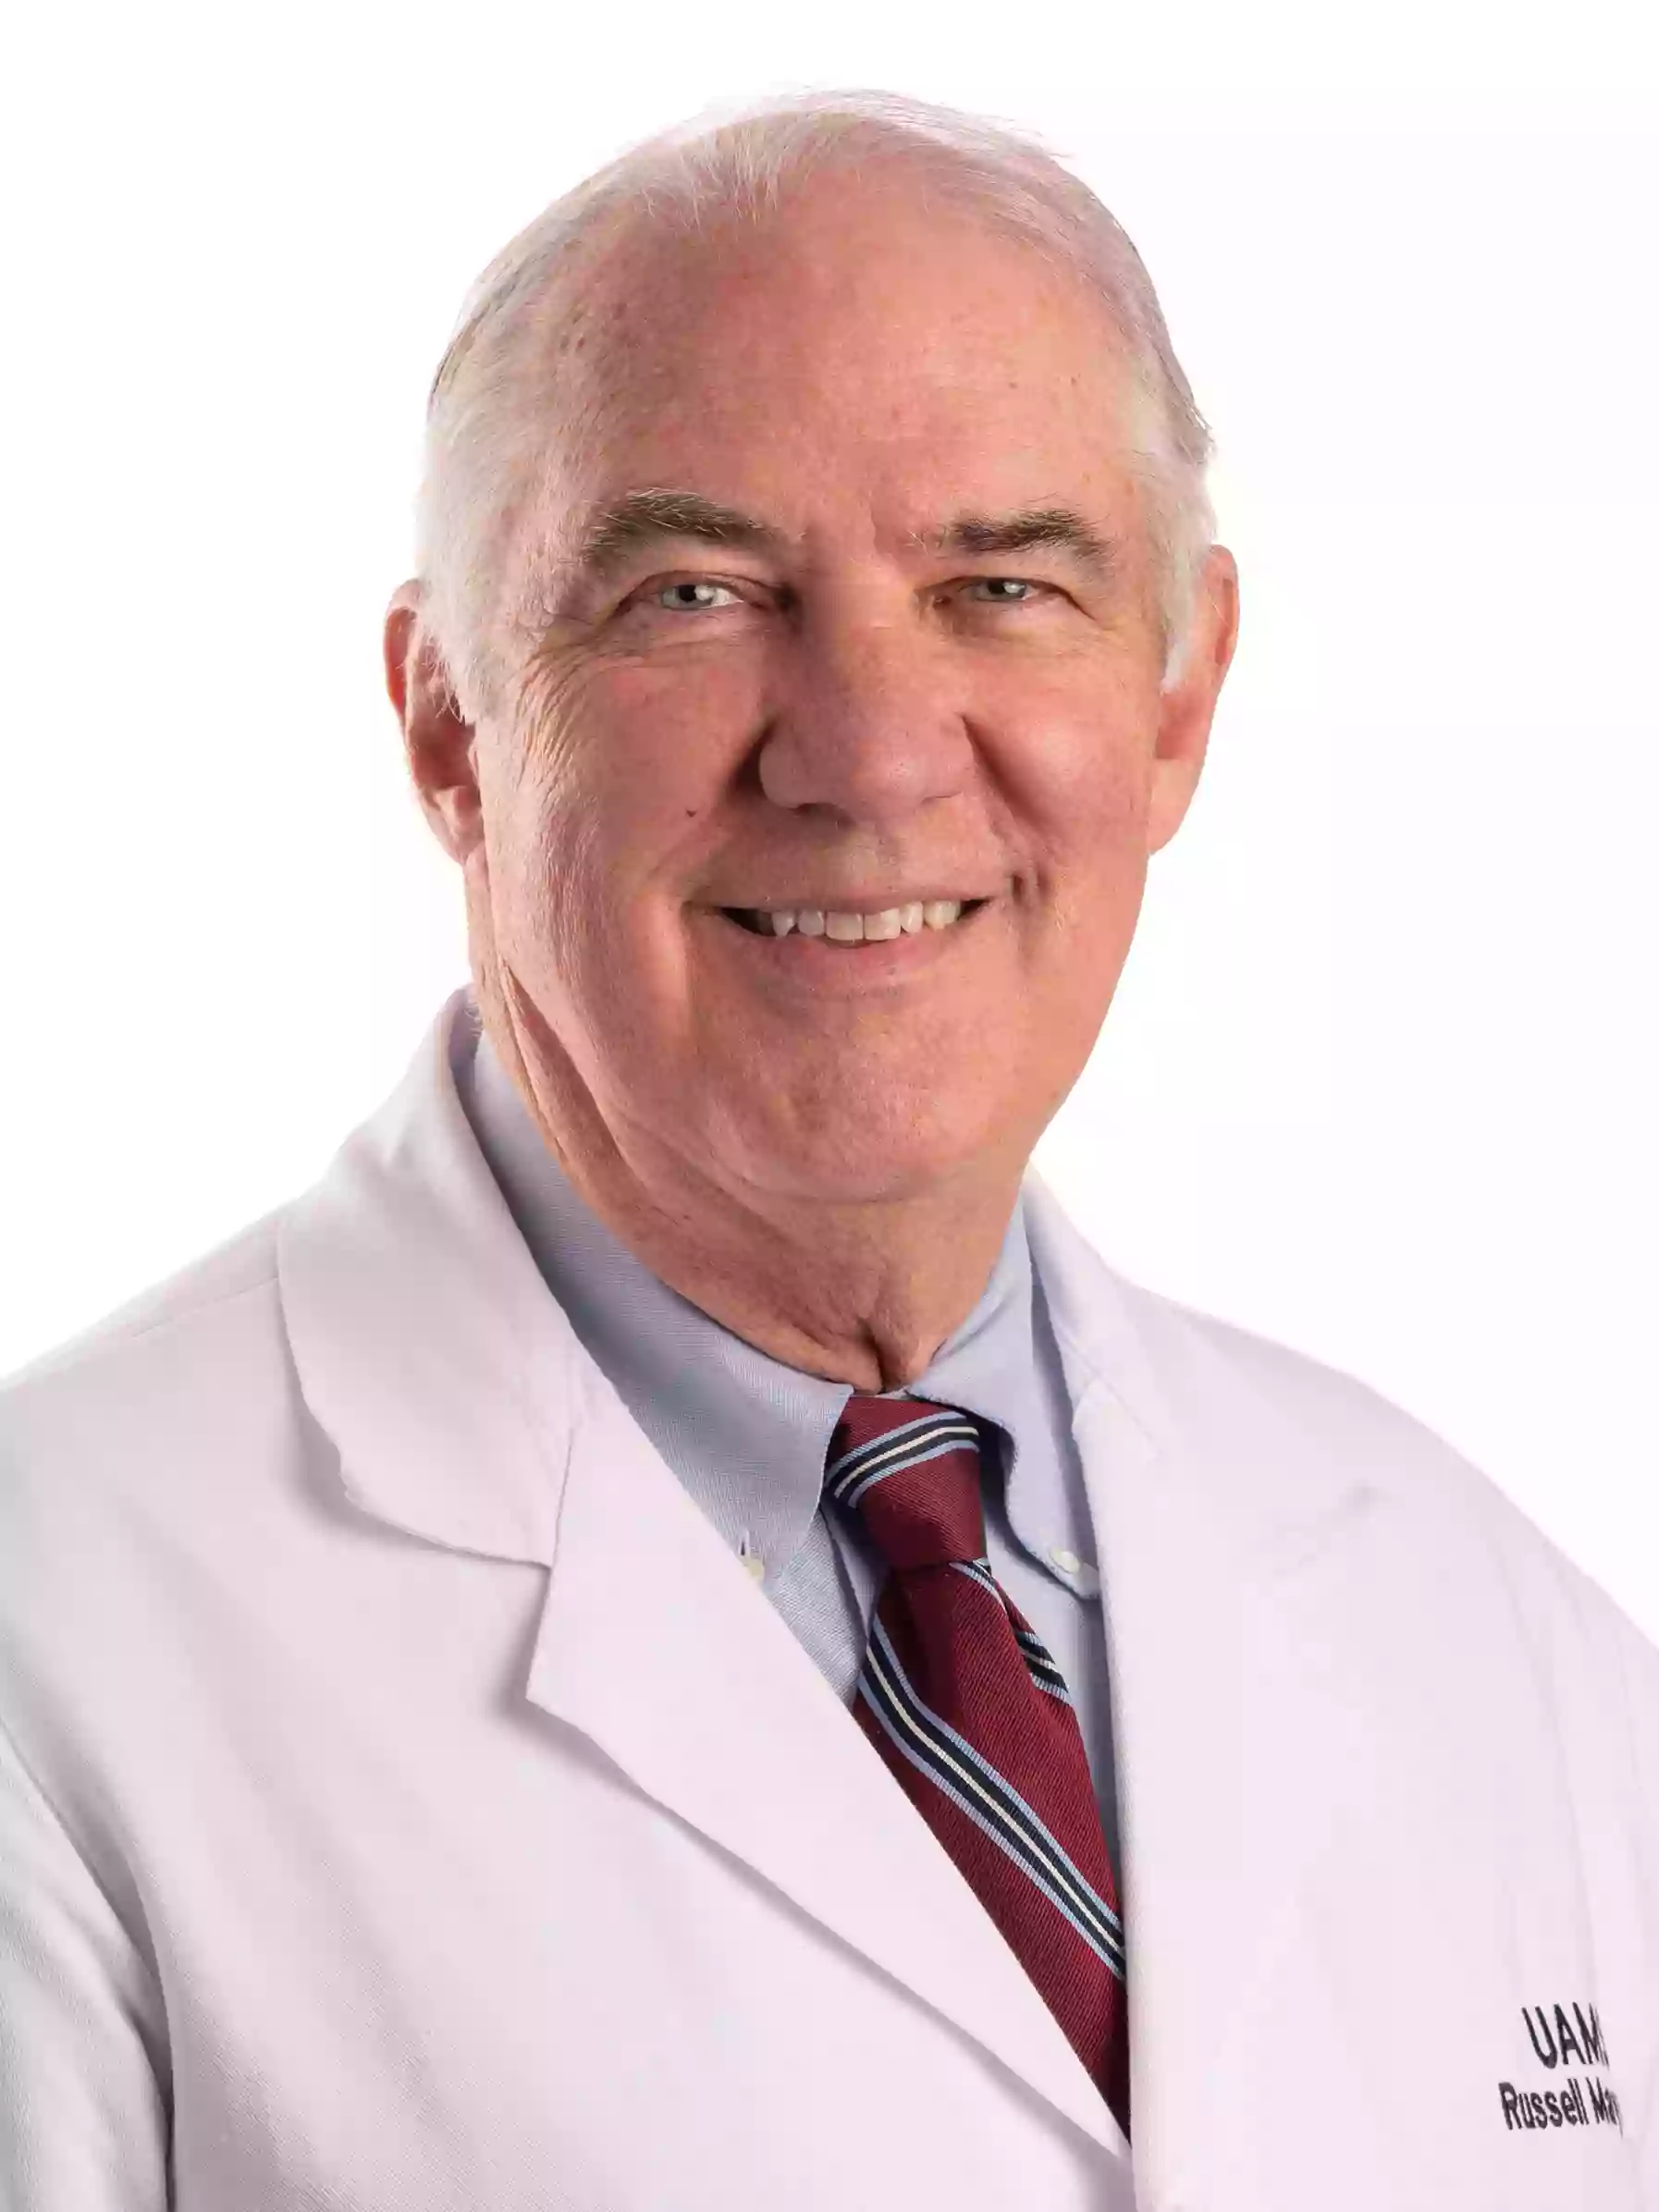 UAMS Health - Russell E. Mayo, M.D.